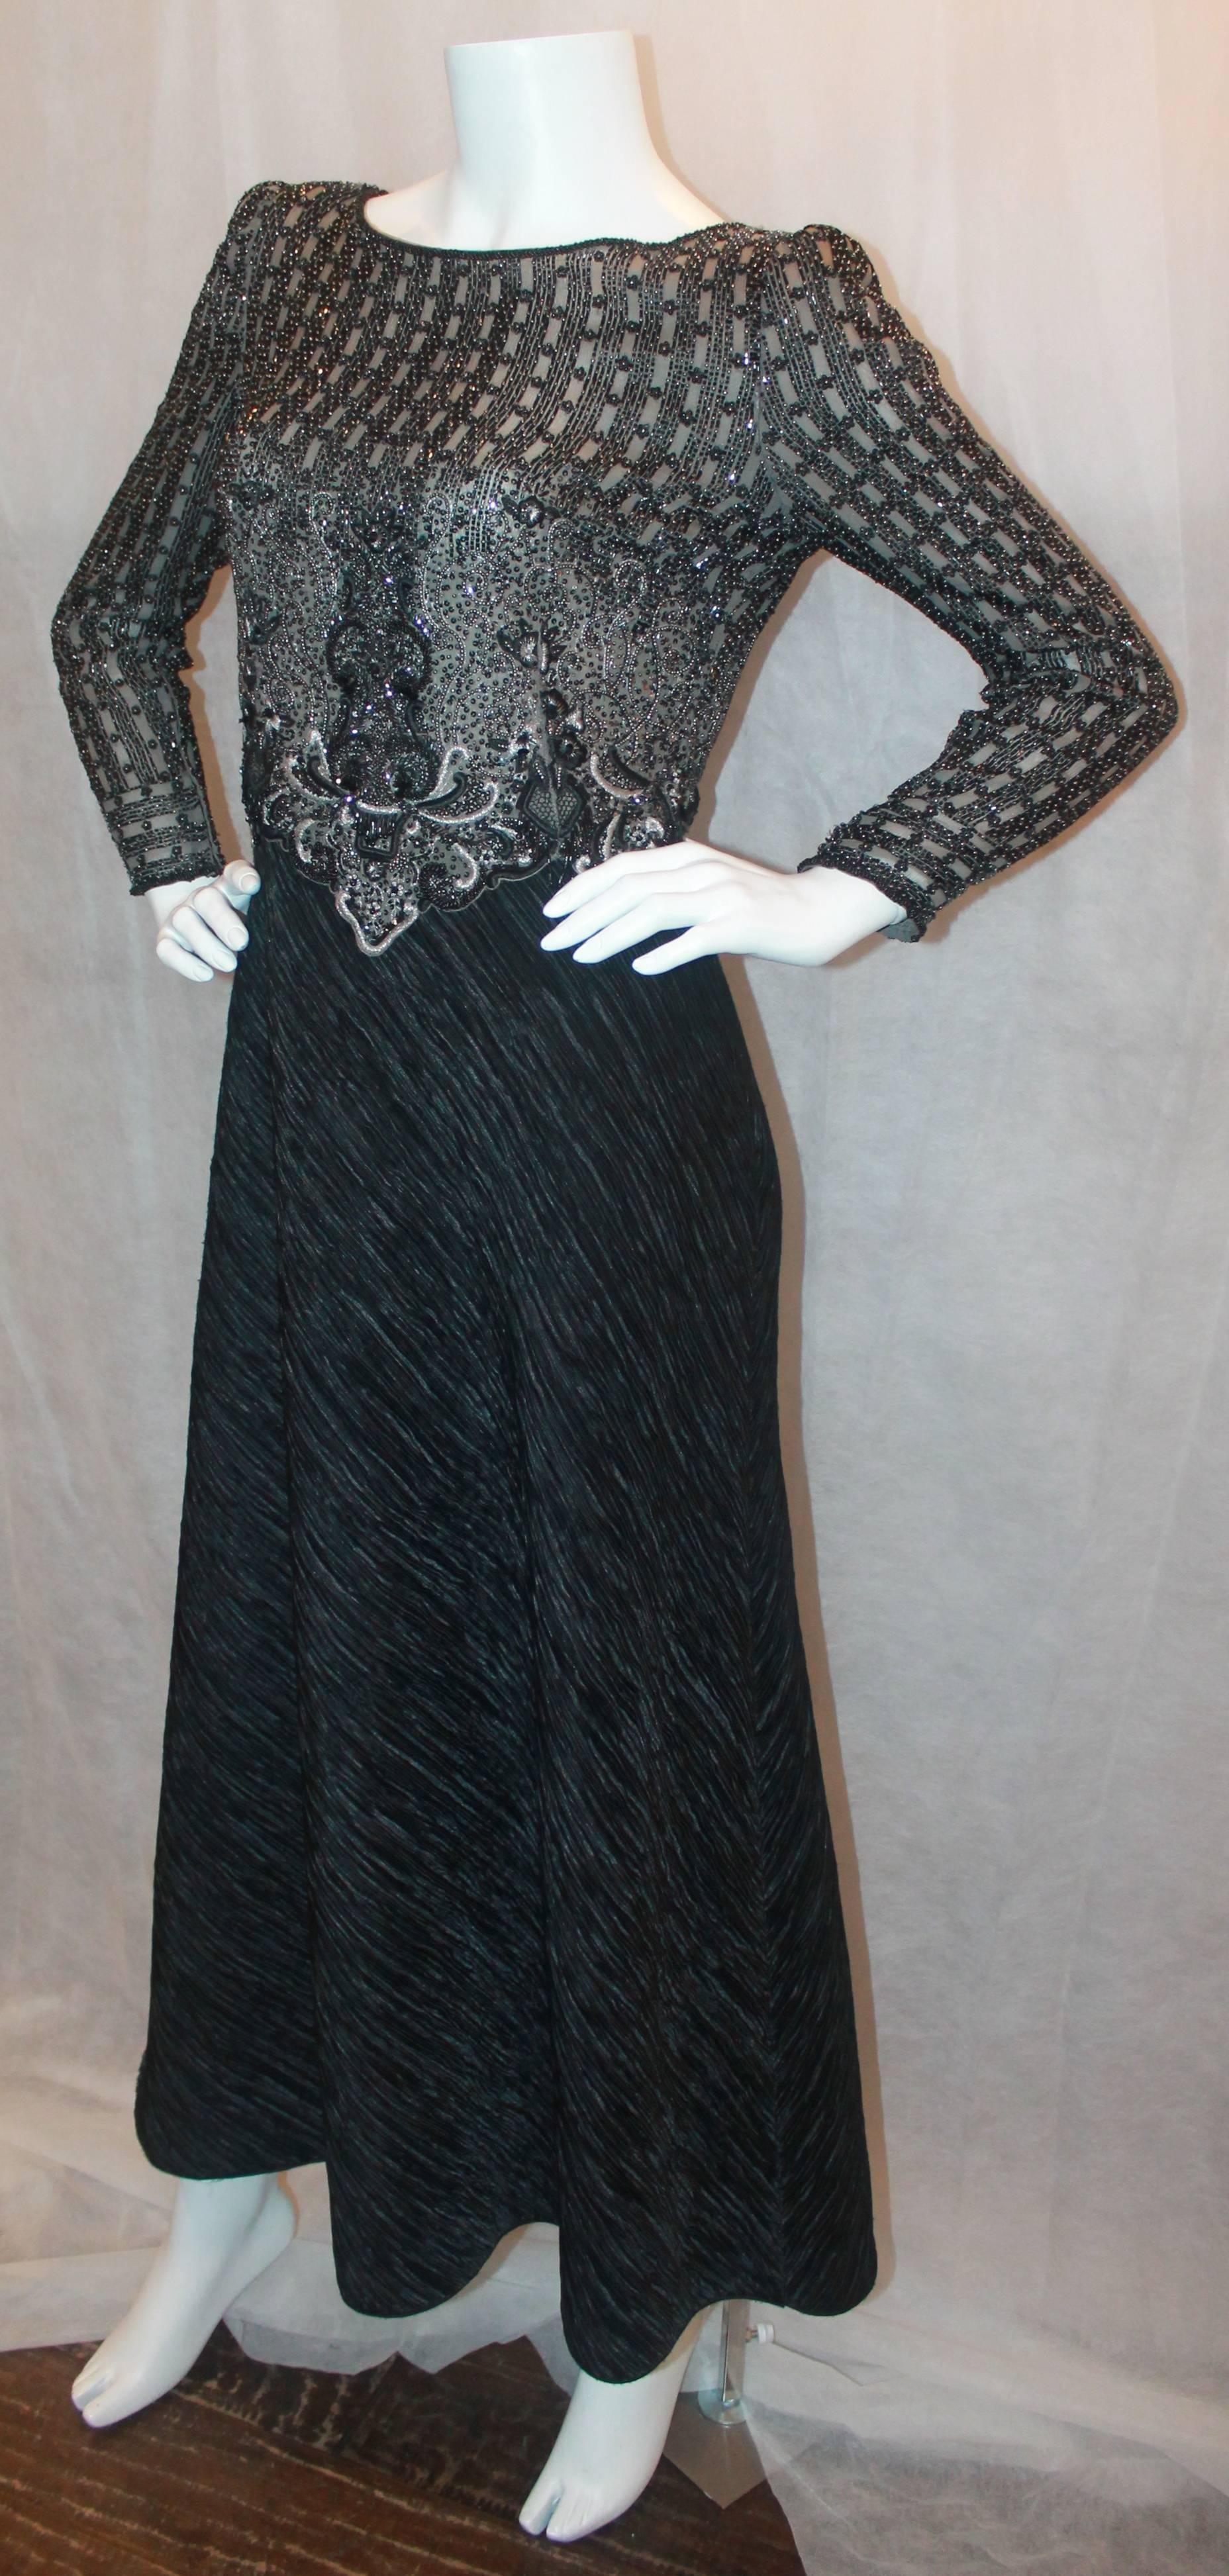 Mary McFadden Couture Black Silk Beaded & Embroidered Gown - 8 - 1980's. This gown is in excellent vintage condition with some beads missing toward the top/shoulders. The beautiful long sleeve gown has heavy beading and embroidery all over the